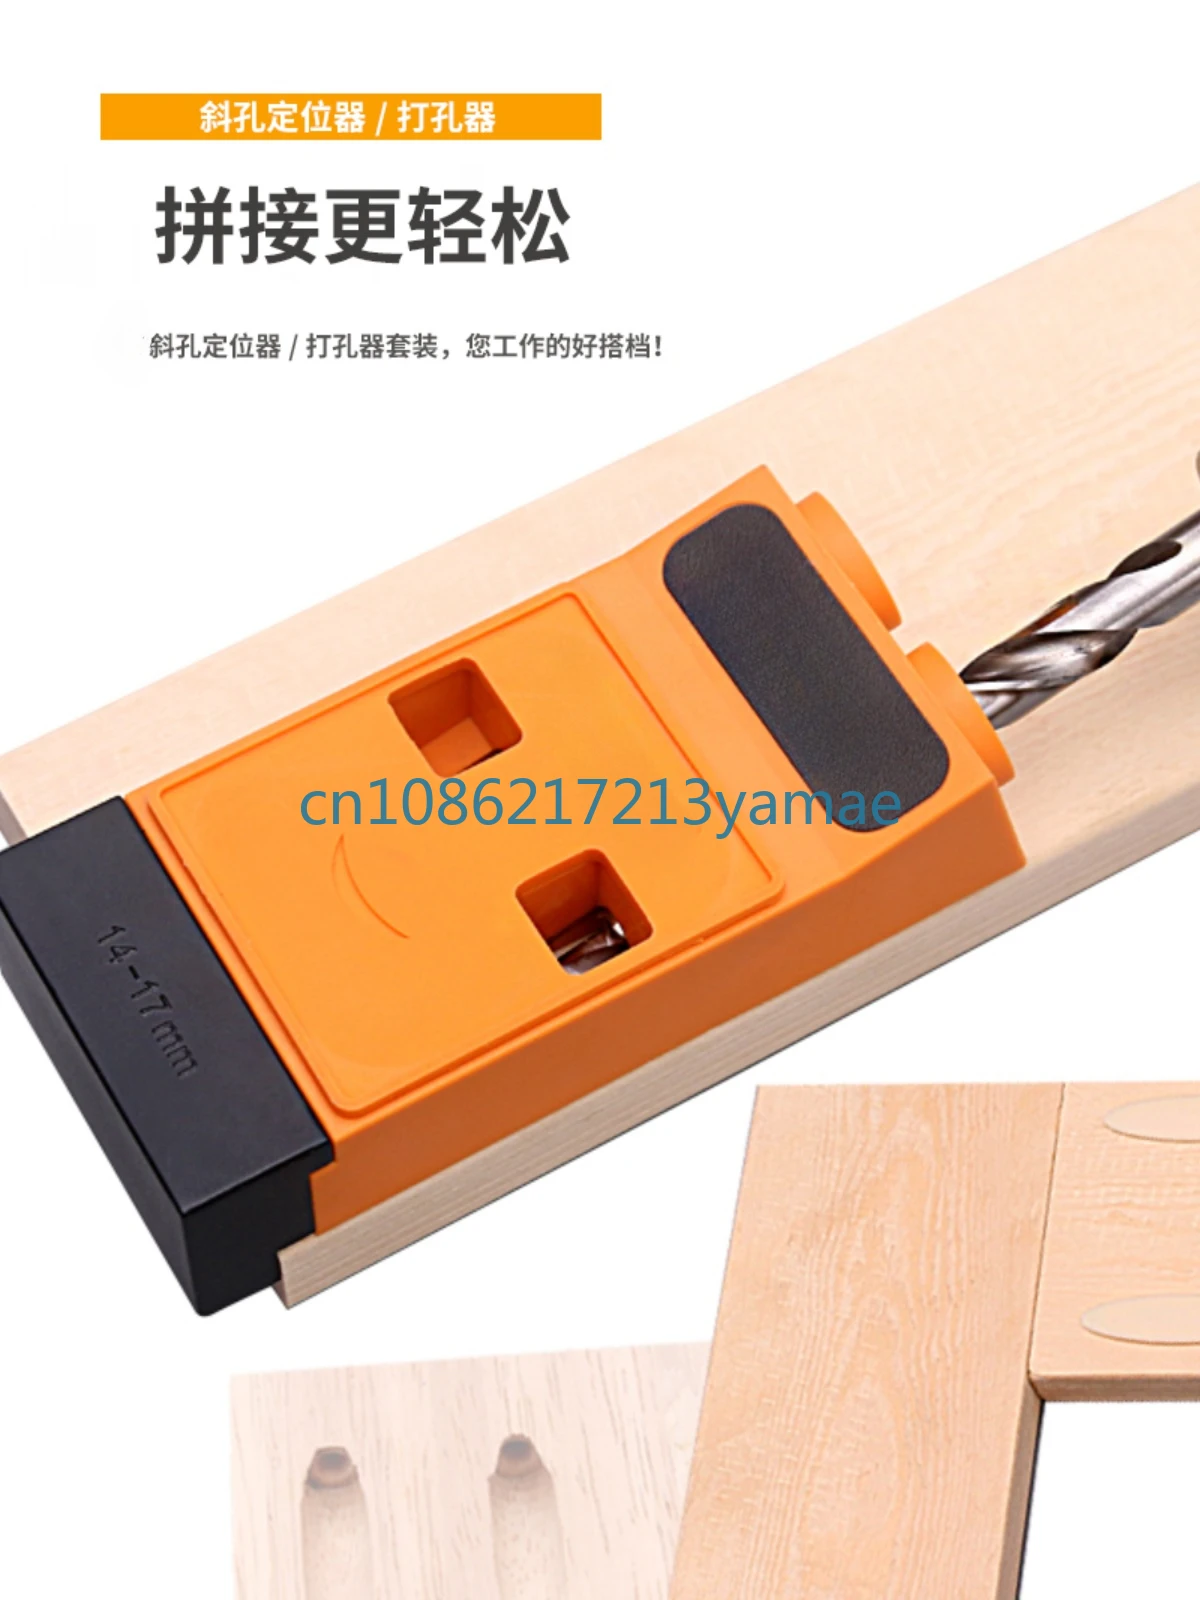 

New Oblique Hole Locator Woodworking Puncher Imported Engineering Plastic Heat Treatment Steel Sleeve